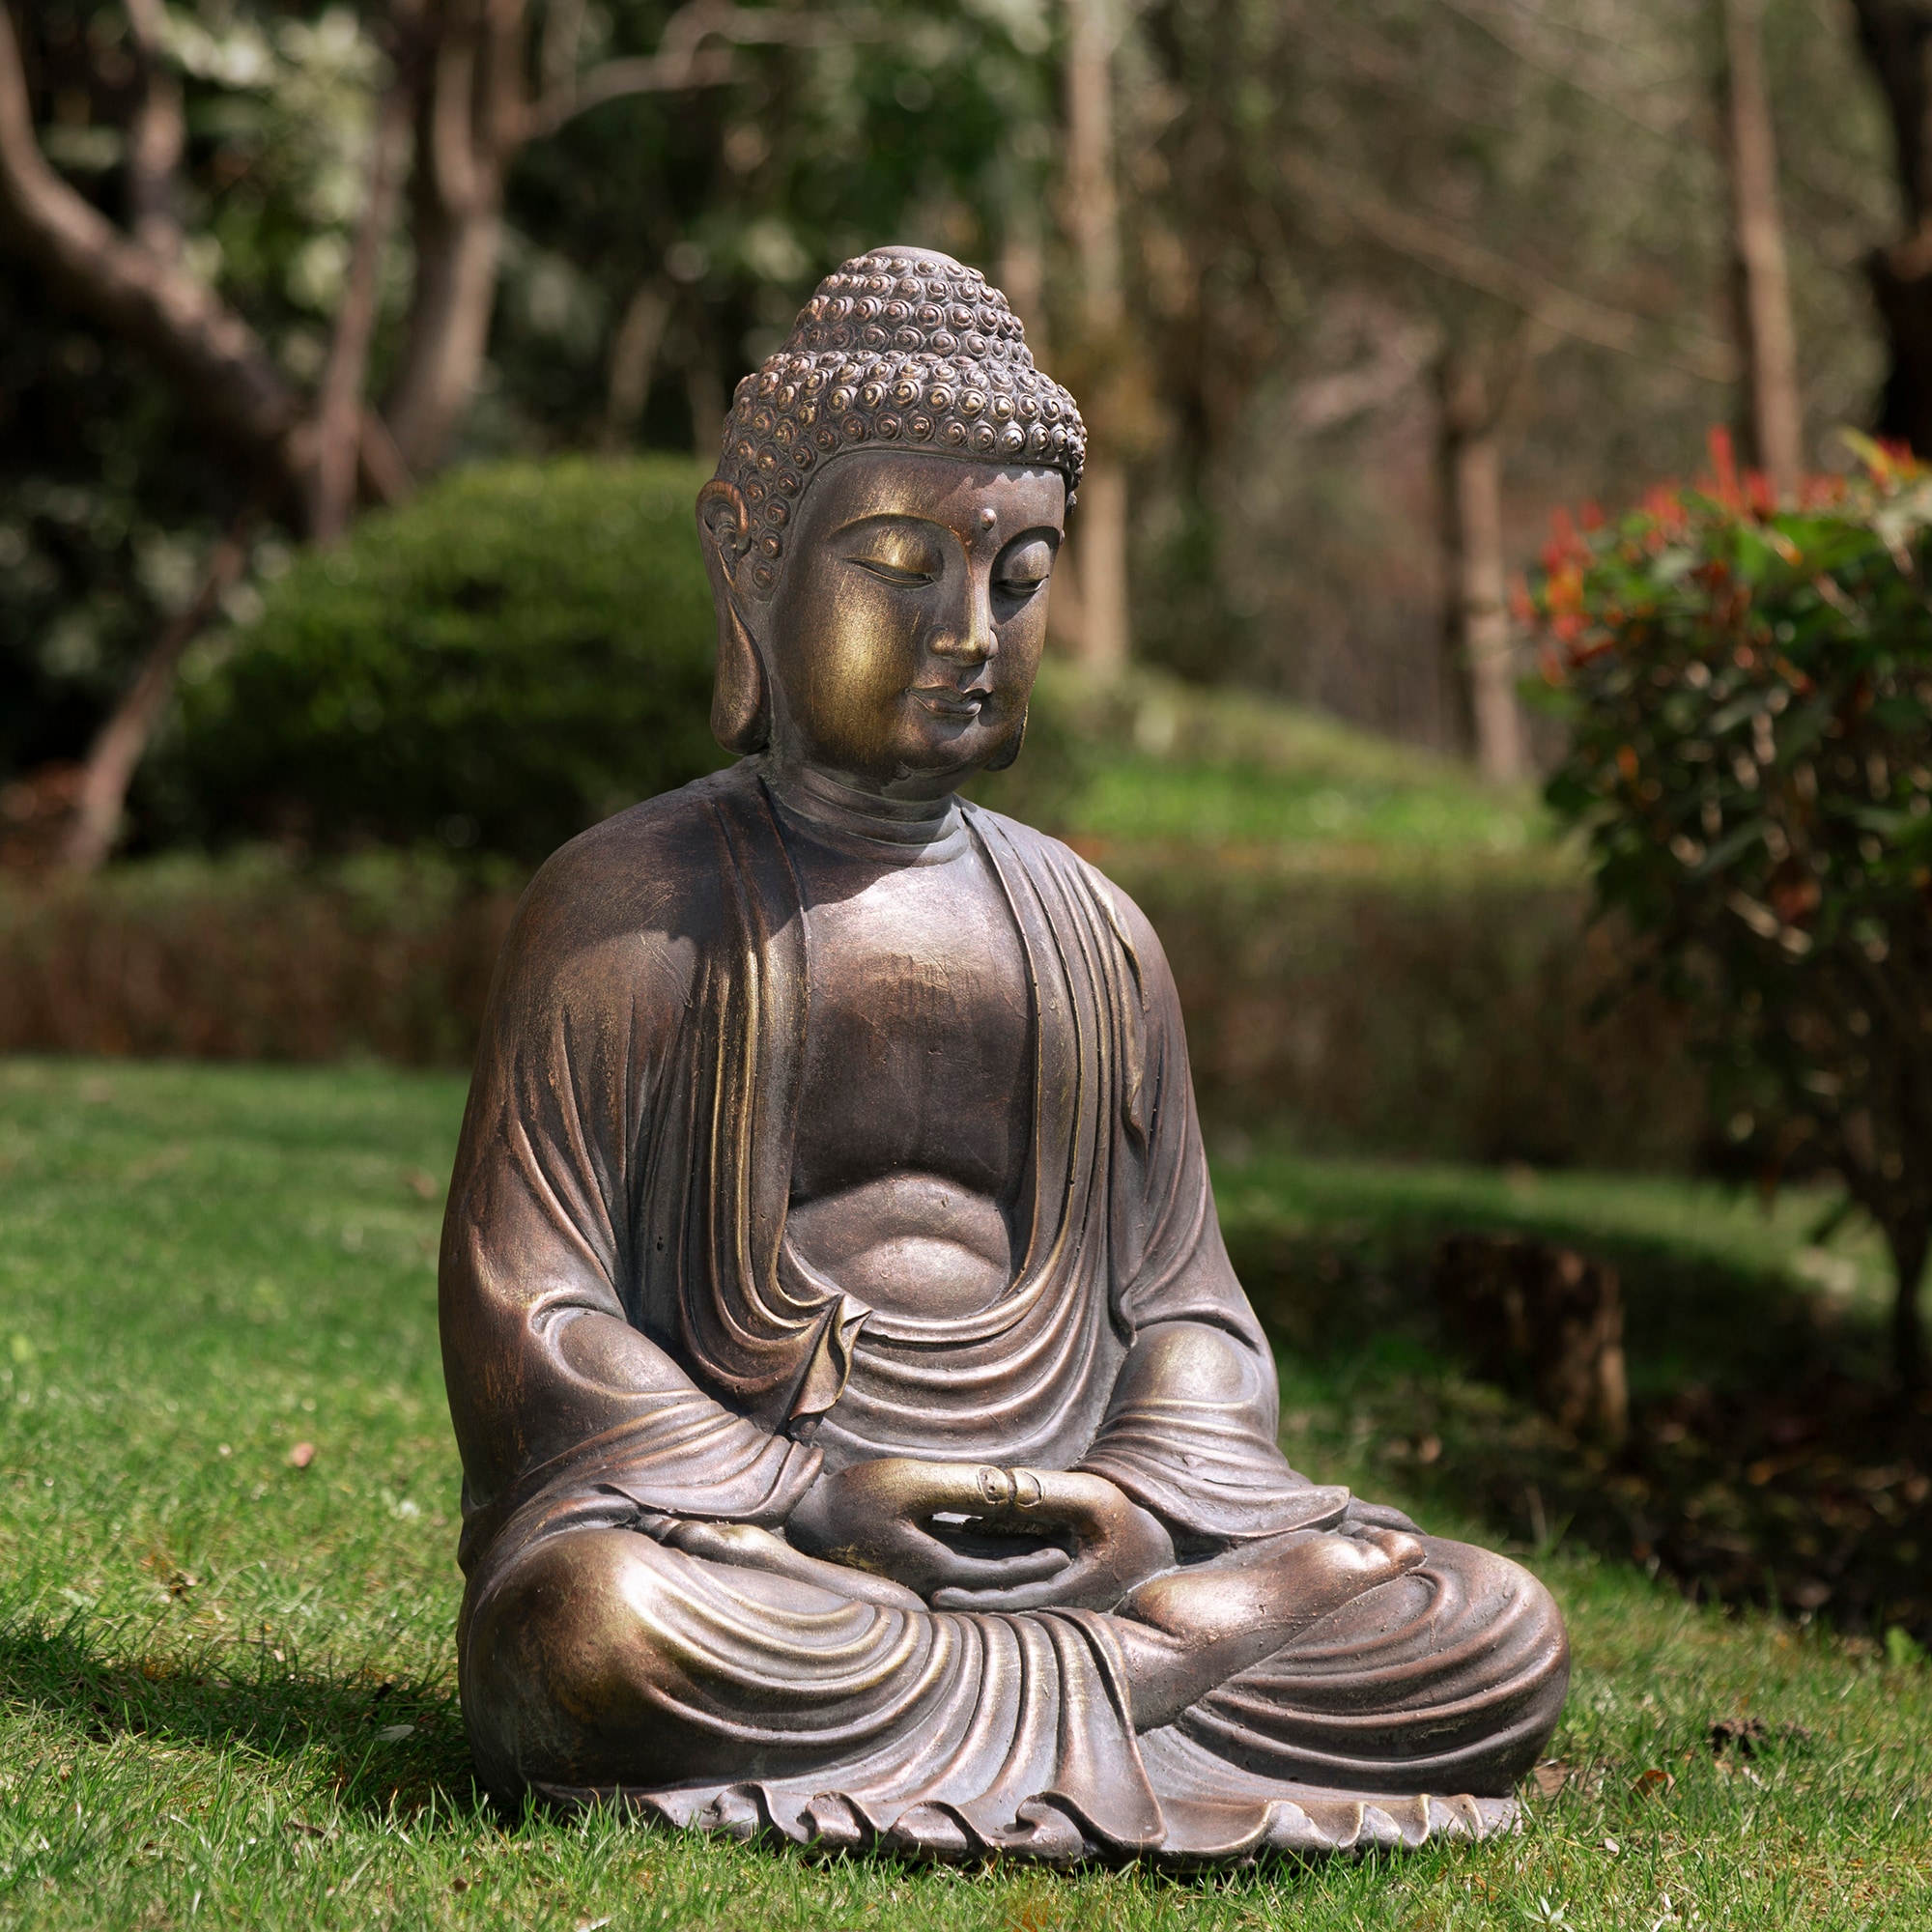 Glitzhome 22.75-in H x 17.5-in W Brown Buddha Garden Statue at Lowes.com